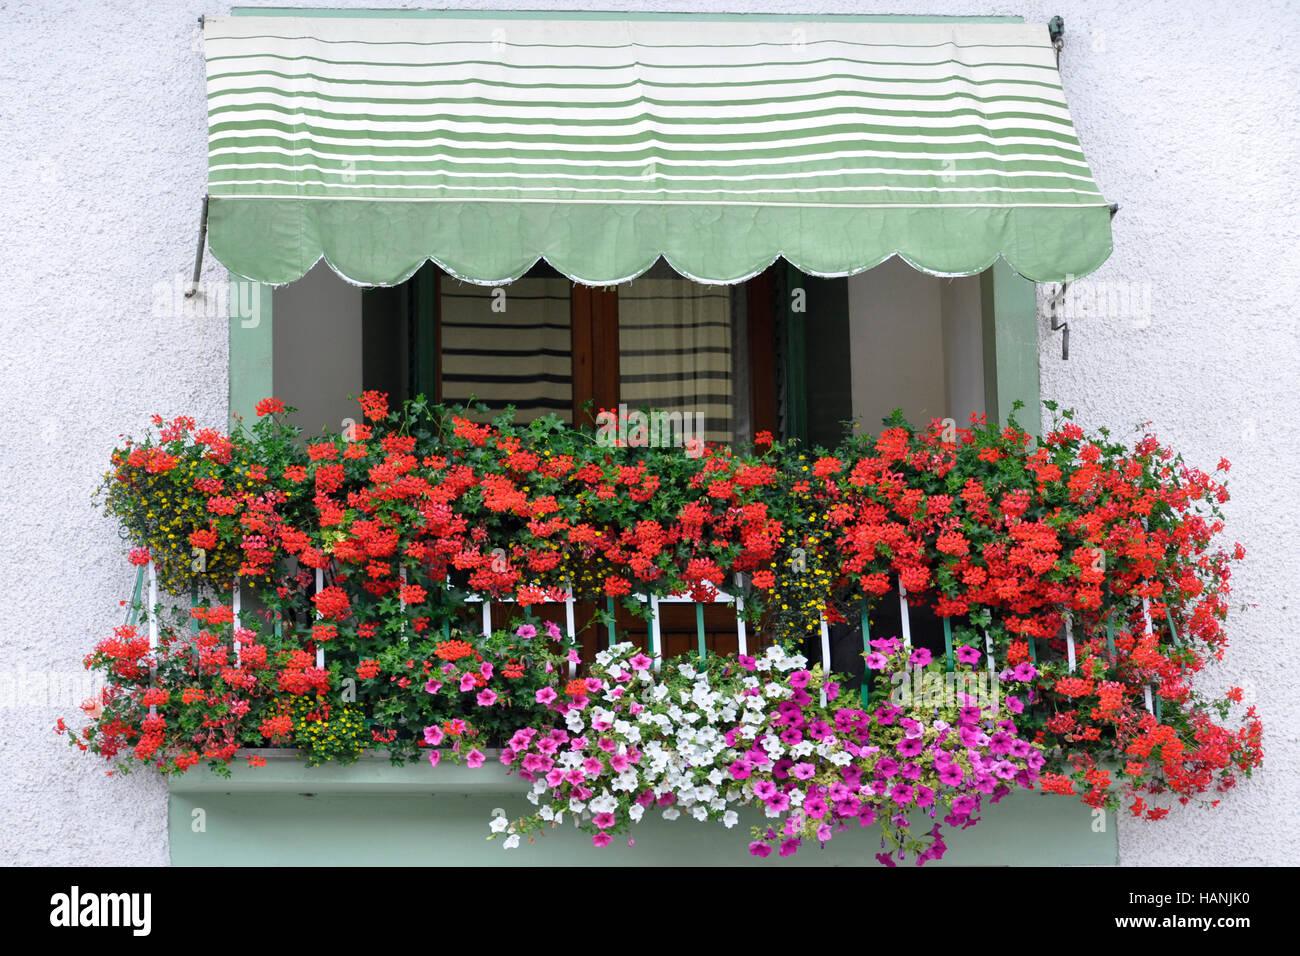 Balcony with flowers in a small Italian town Stock Photo